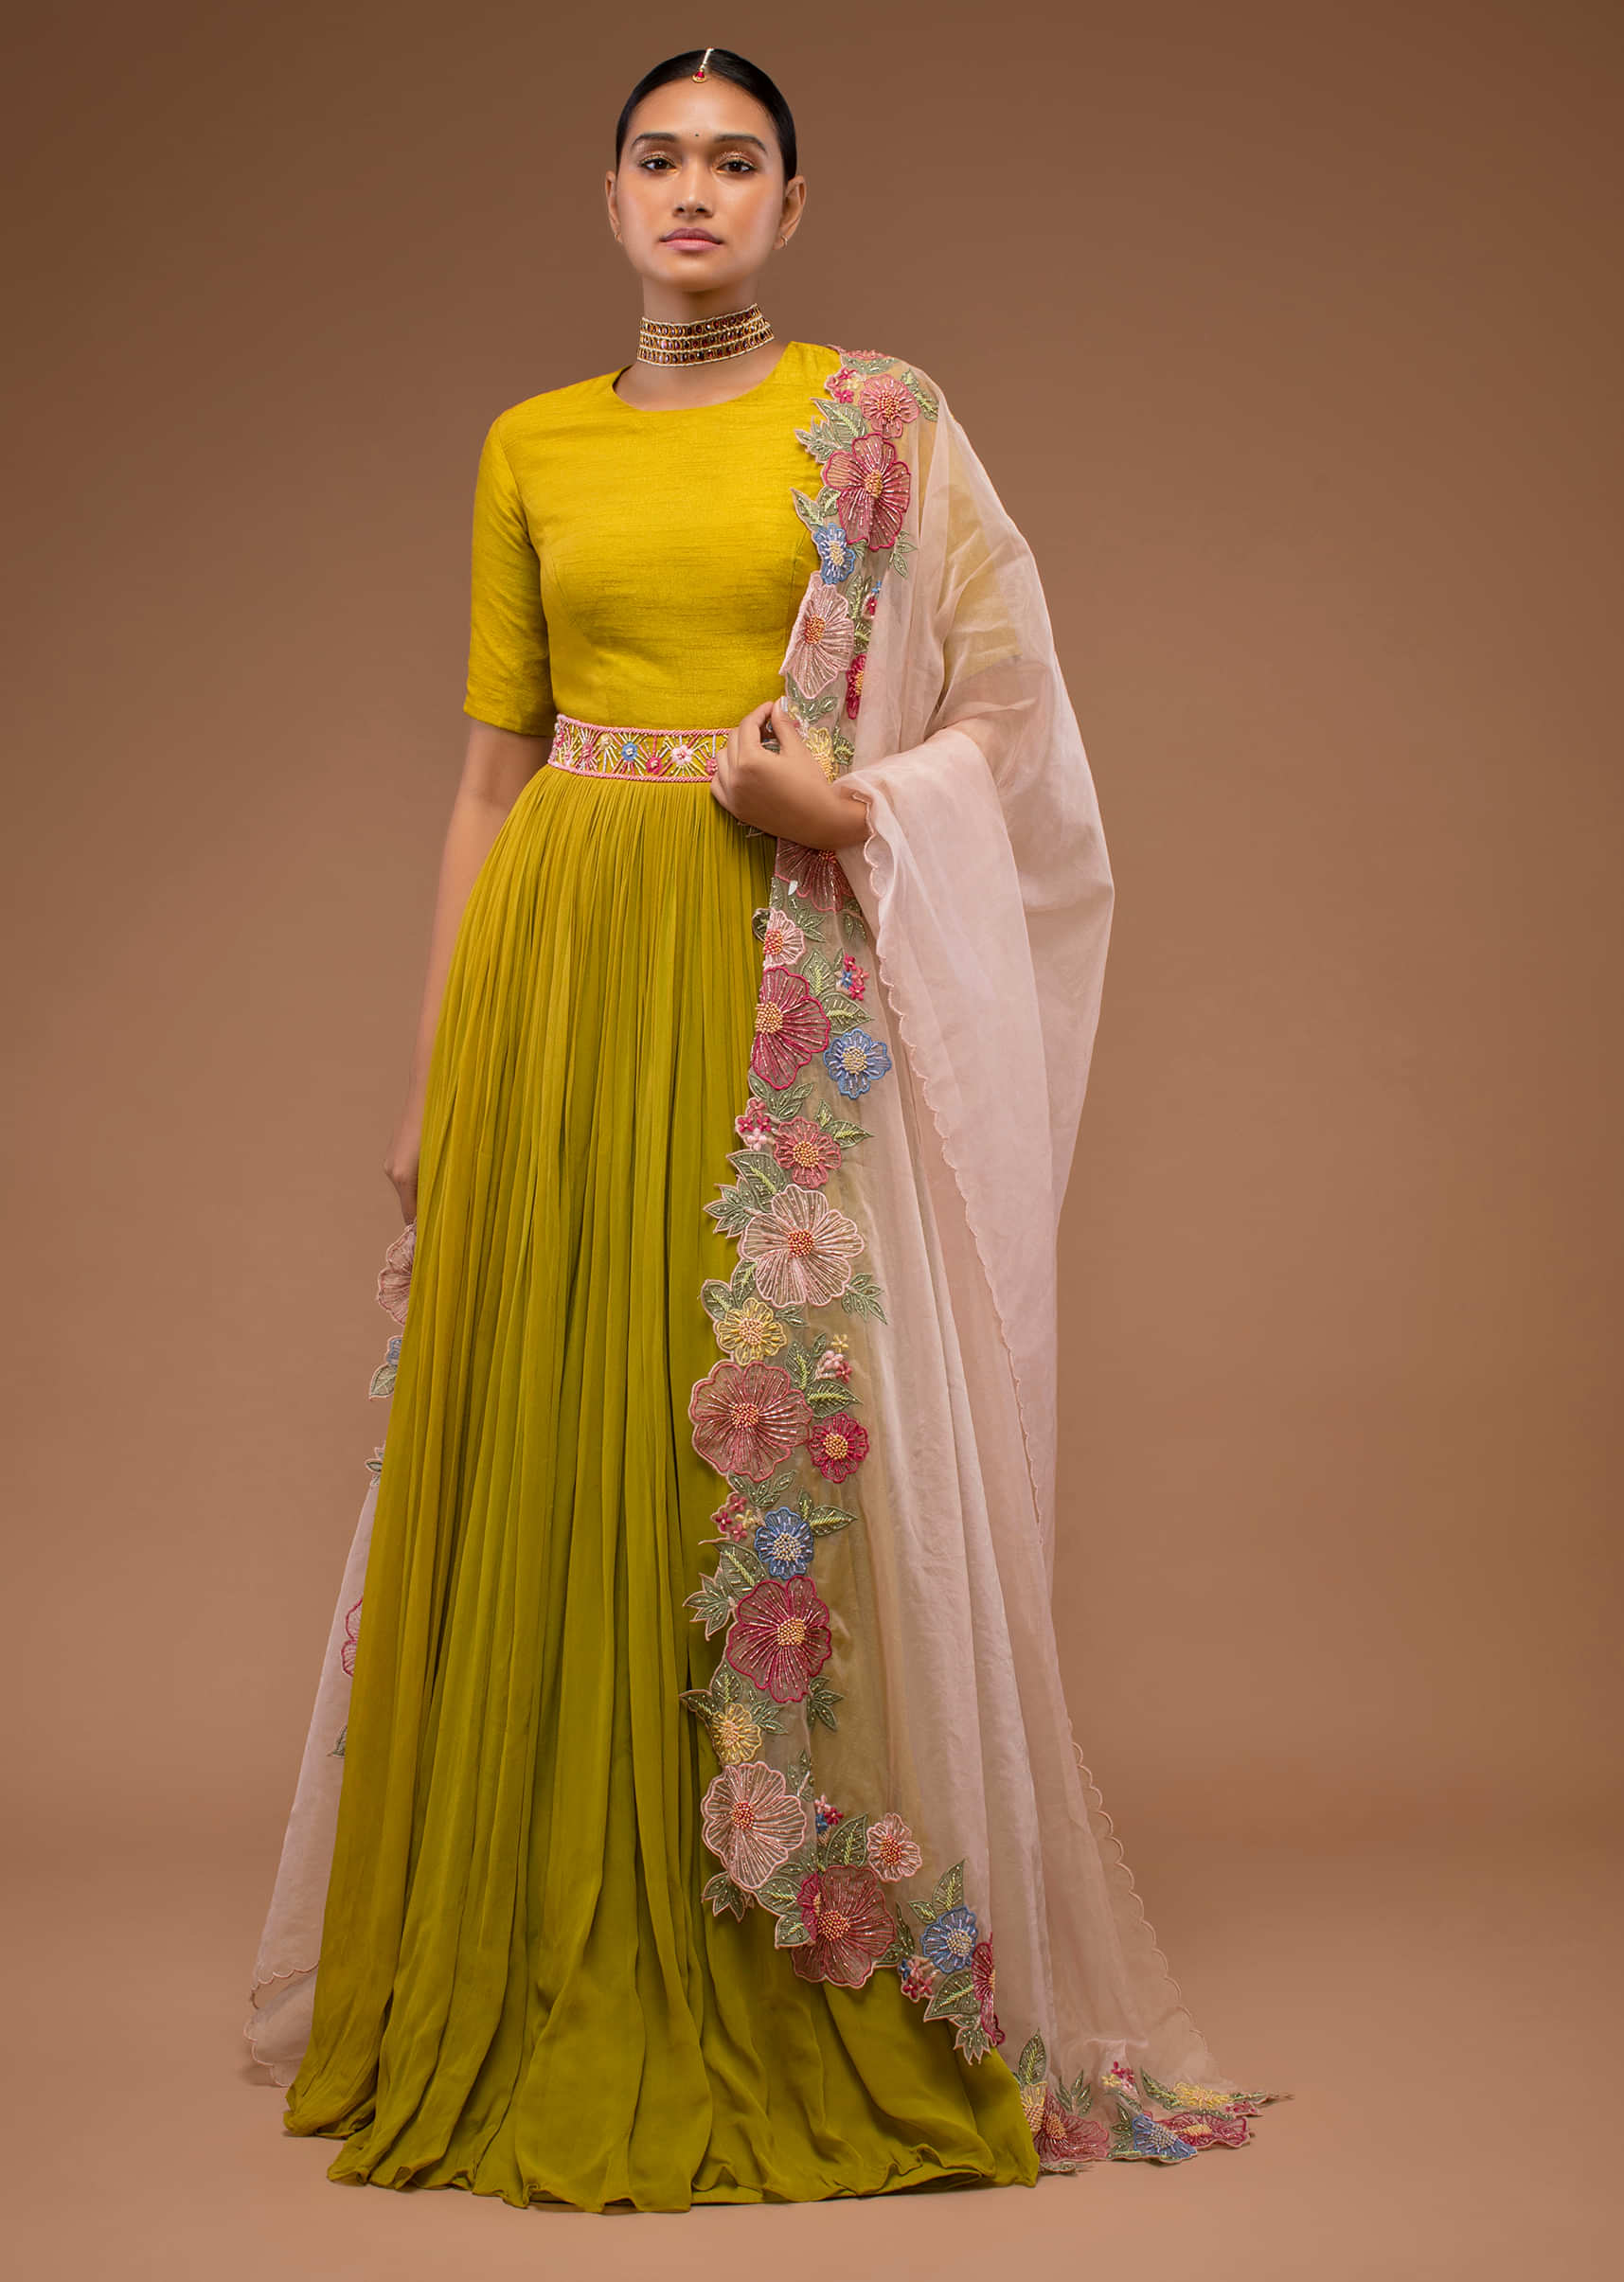 Citrus Floor-Length Sharara Suit In Resham Work Embroidery, Crafted In Georgette With Half Sleeves With Hooks Closure On The Neckline